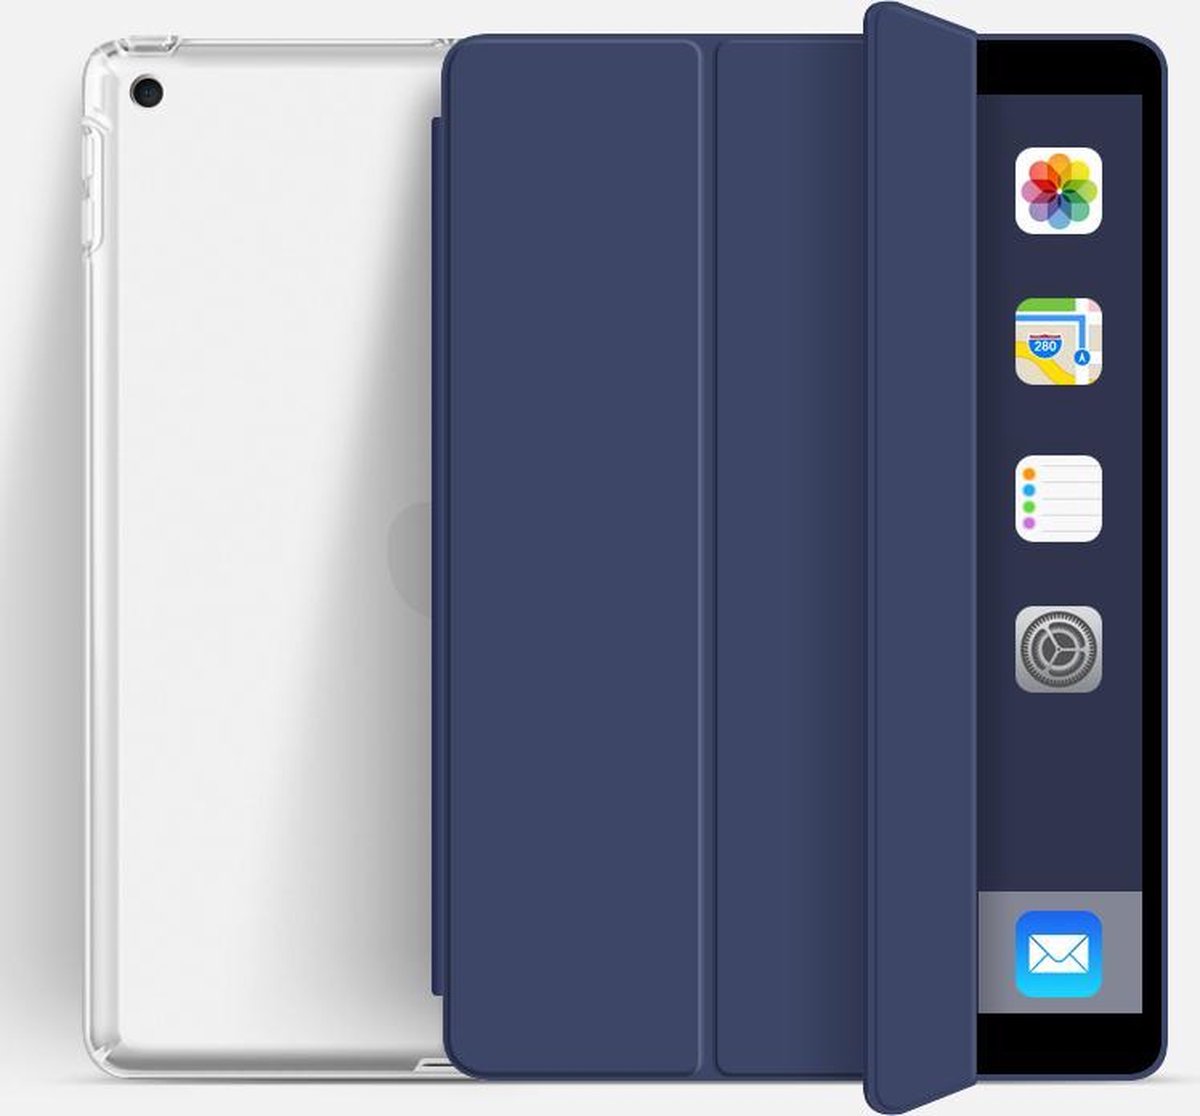 Ipad air 4 transparant 2020 - 10.9 inch – Ipad hoes – soft cover – Hoes voor iPad – Tablet beschermer - navy